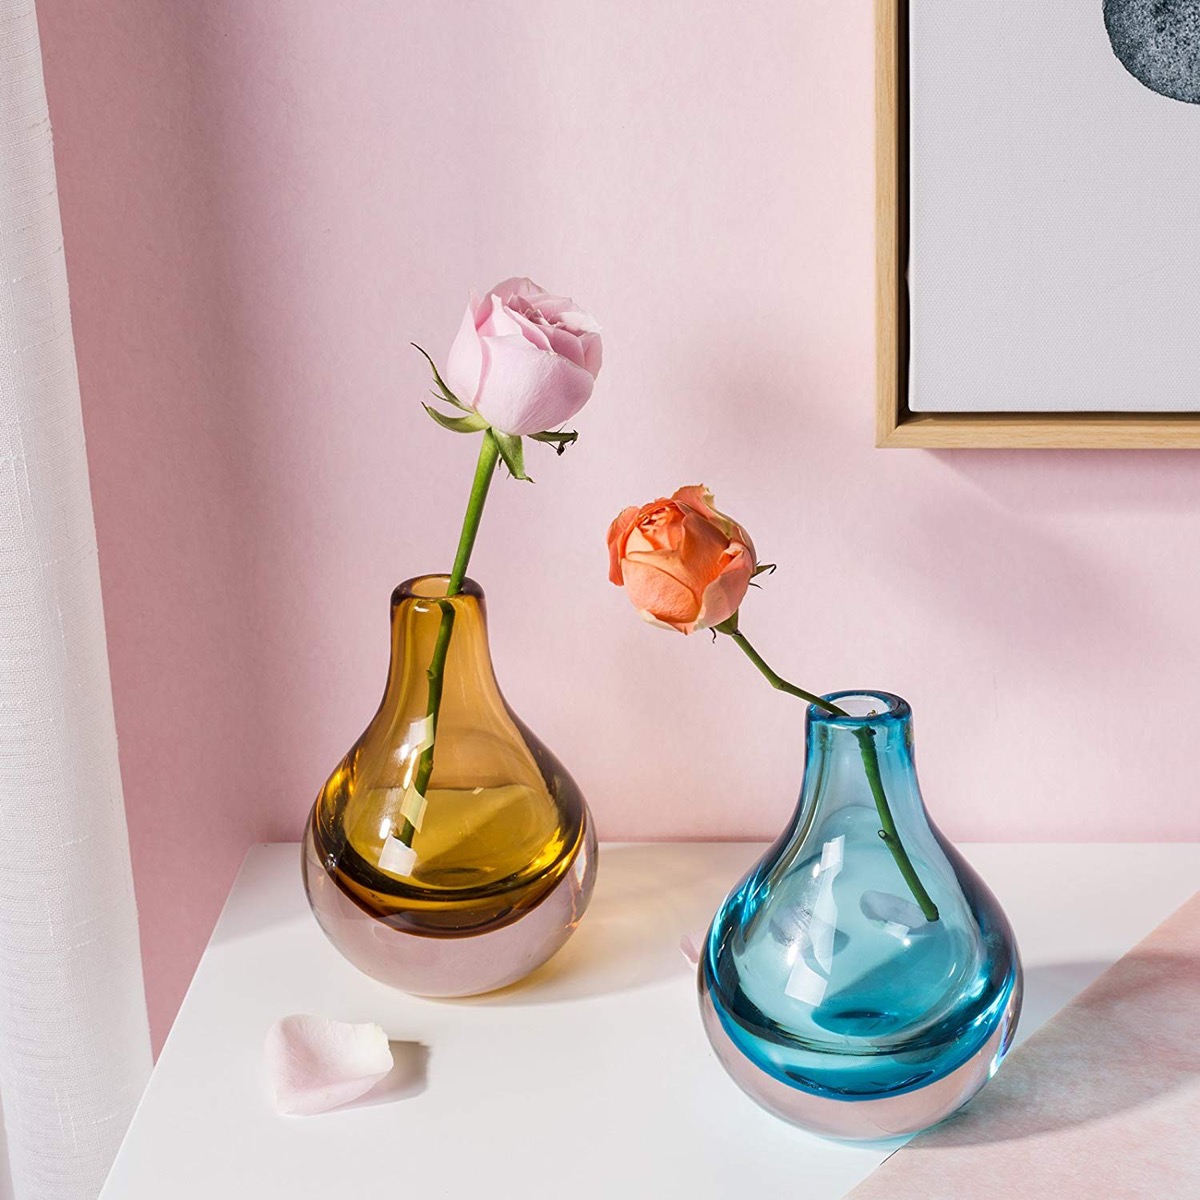 51 Vases To Fill Home With Flowers Delight